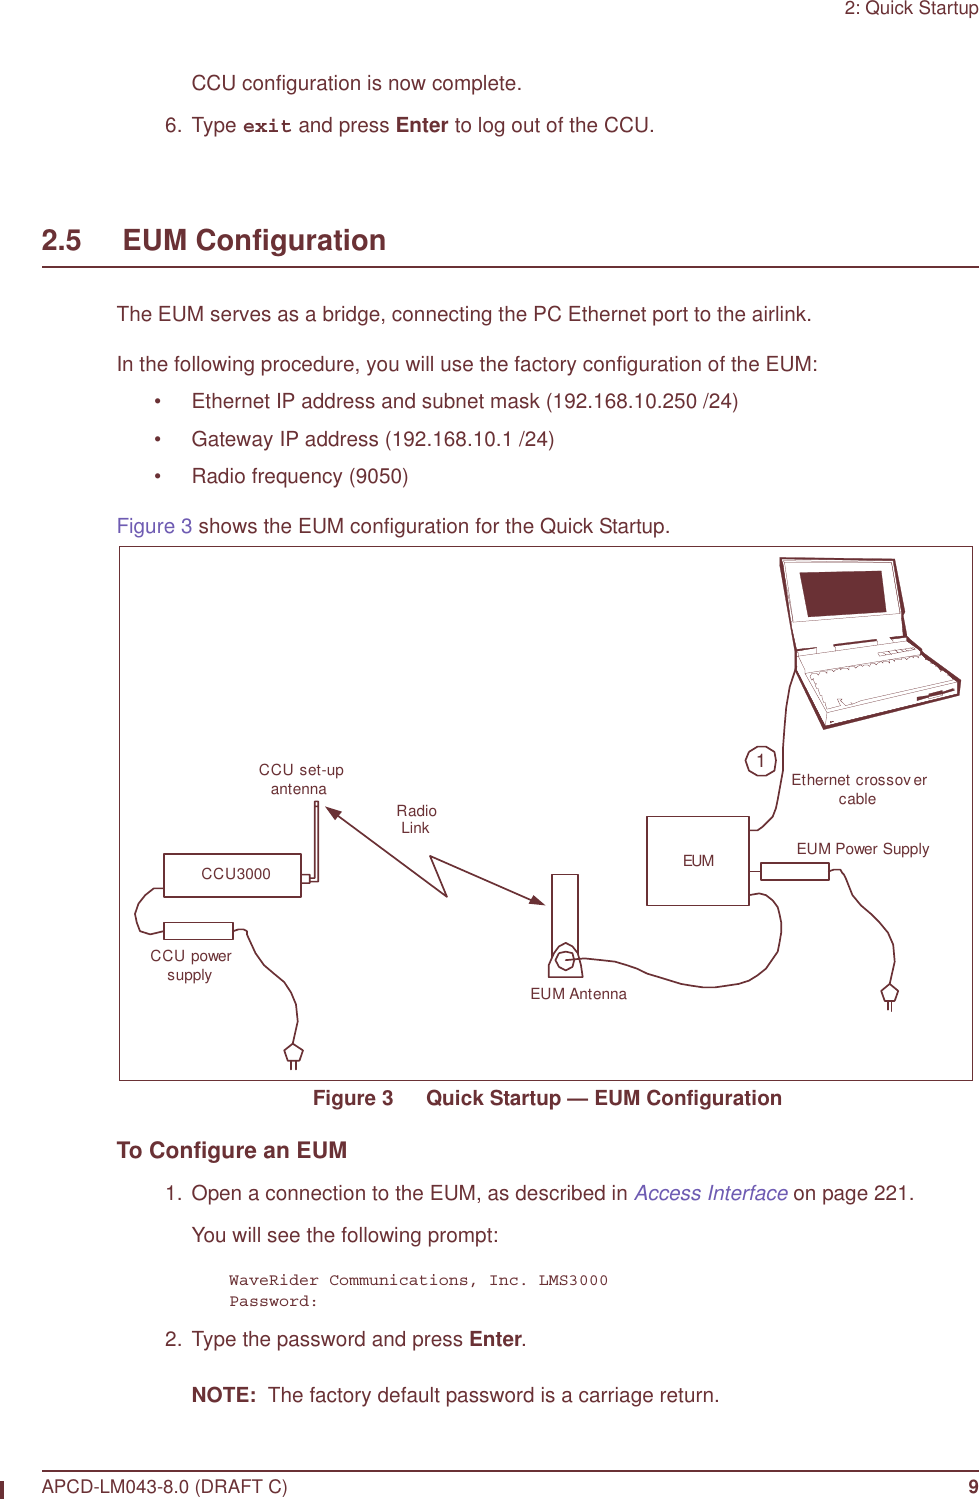 2: Quick StartupAPCD-LM043-8.0 (DRAFT C) 9CCU configuration is now complete. 6. Type exit and press Enter to log out of the CCU.2.5     EUM ConfigurationThe EUM serves as a bridge, connecting the PC Ethernet port to the airlink. In the following procedure, you will use the factory configuration of the EUM:• Ethernet IP address and subnet mask (192.168.10.250 /24)• Gateway IP address (192.168.10.1 /24)• Radio frequency (9050)Figure 3 shows the EUM configuration for the Quick Startup.Figure 3   Quick Startup — EUM ConfigurationTo Configure an EUM  1.  Open a connection to the EUM, as described in Access Interface on page 221.You will see the following prompt:WaveRider Communications, Inc. LMS3000Password:  2. Type the password and press Enter.NOTE:  The factory default password is a carriage return.CCU3000Ethernet crossovercableCCU set-upantennaCCU powersupplyEUMEUM AntennaEUM Power Supply1RadioLink